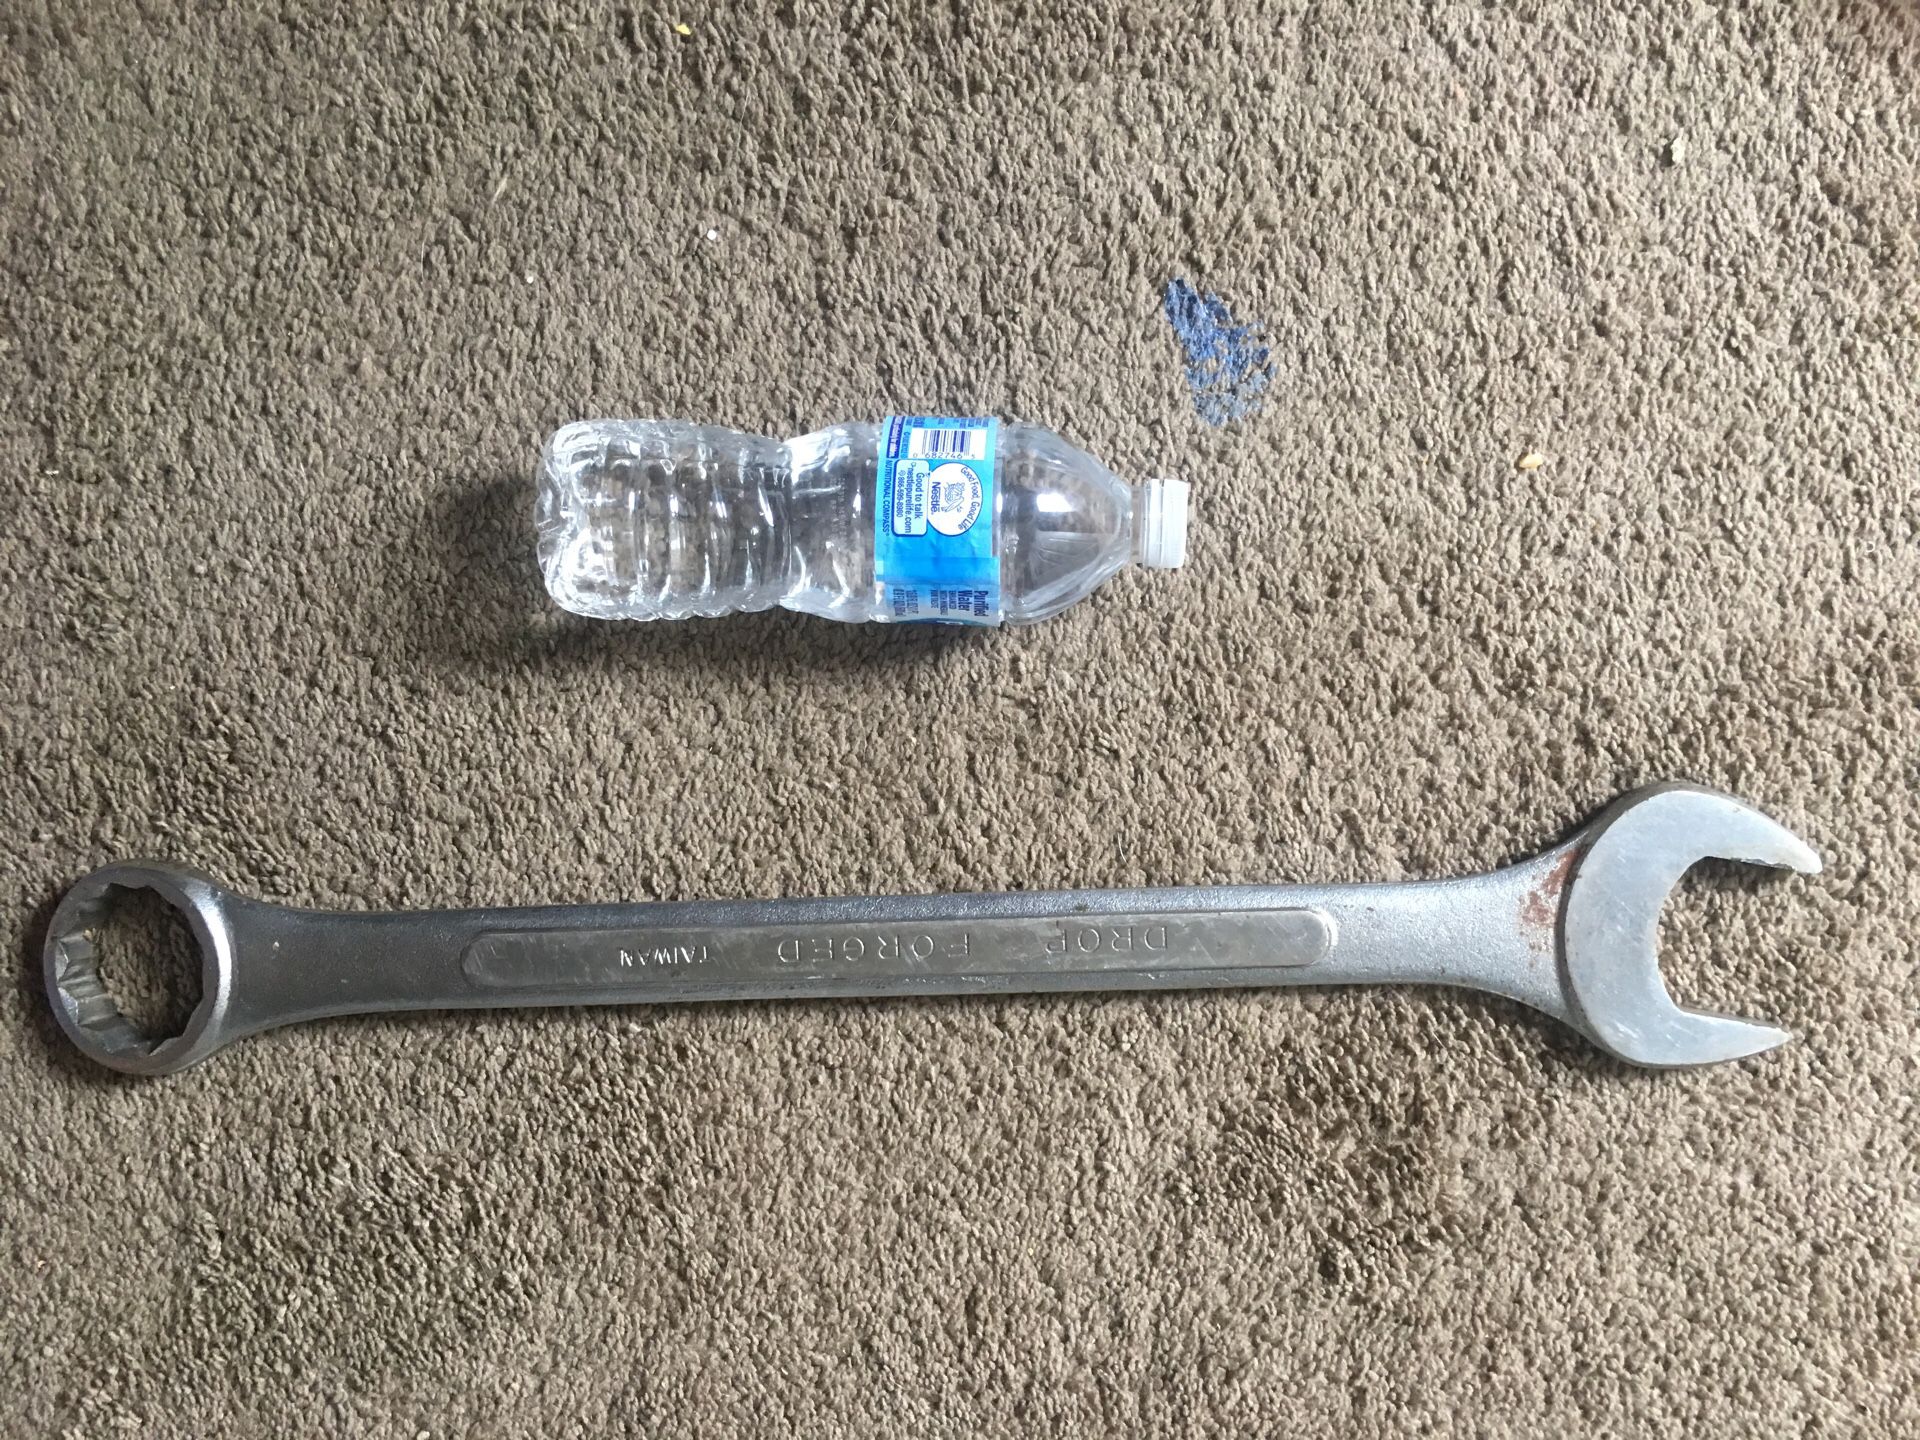 2 foot long drop forged wrench 2”